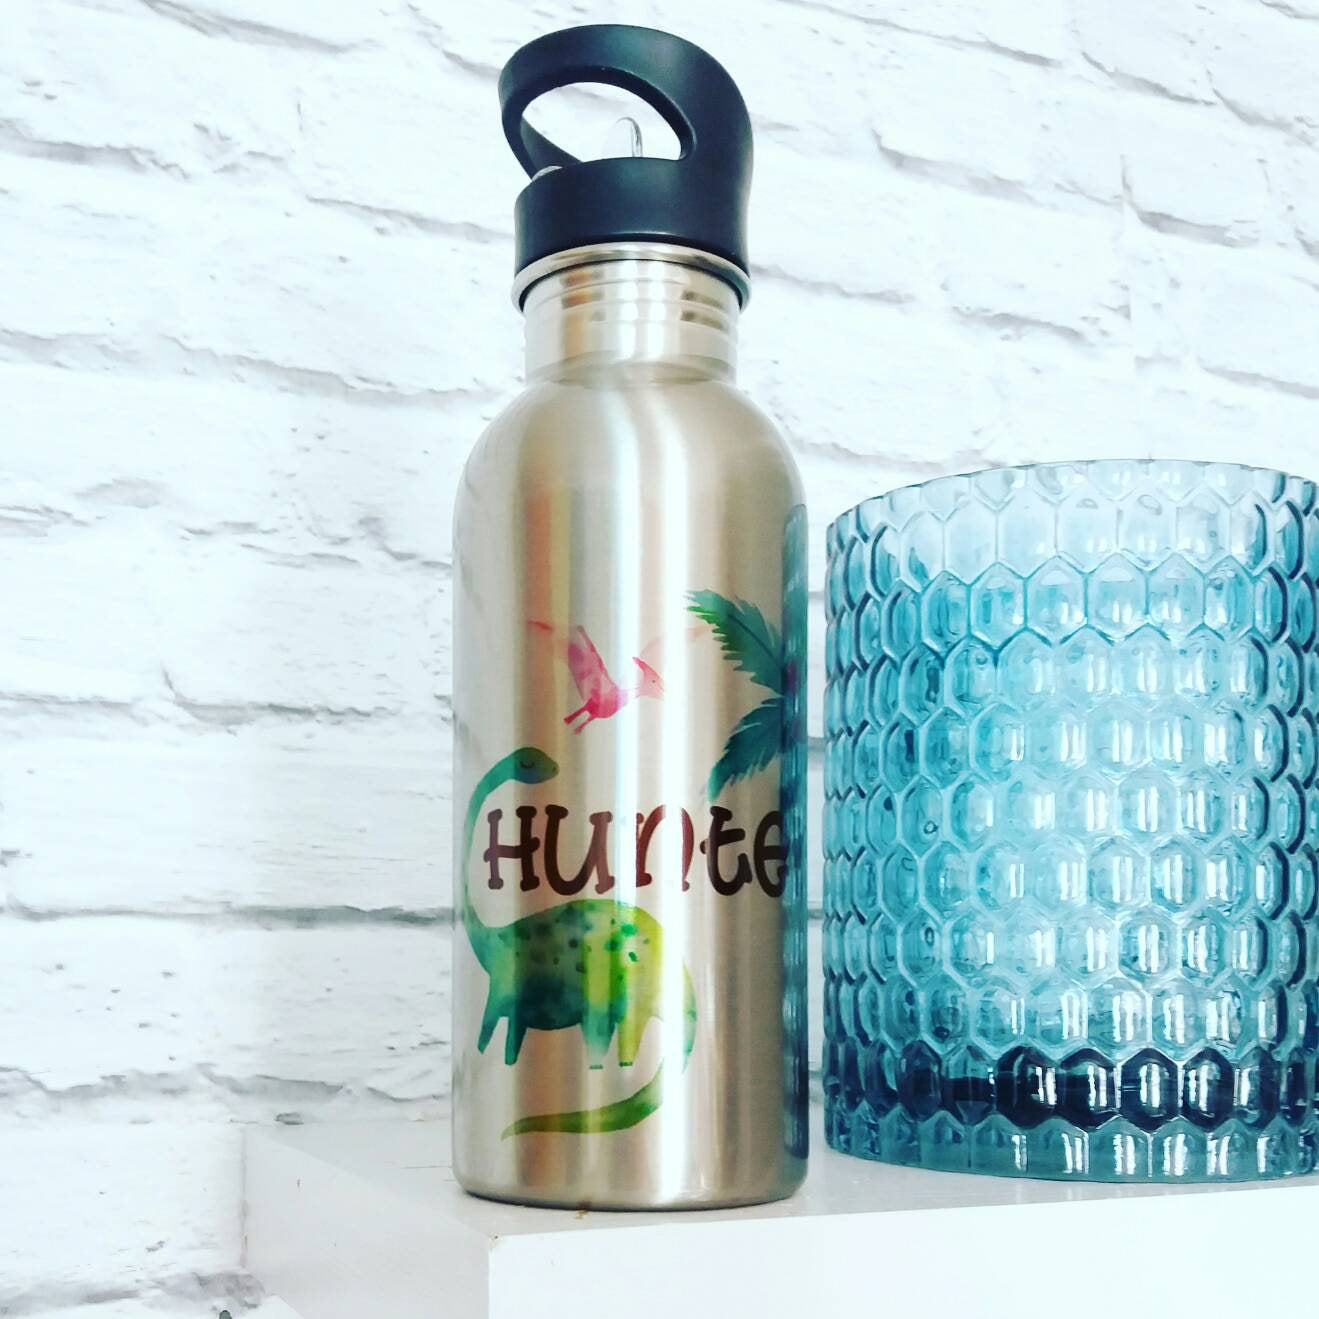 Stainless steel water bottle, fully personalised